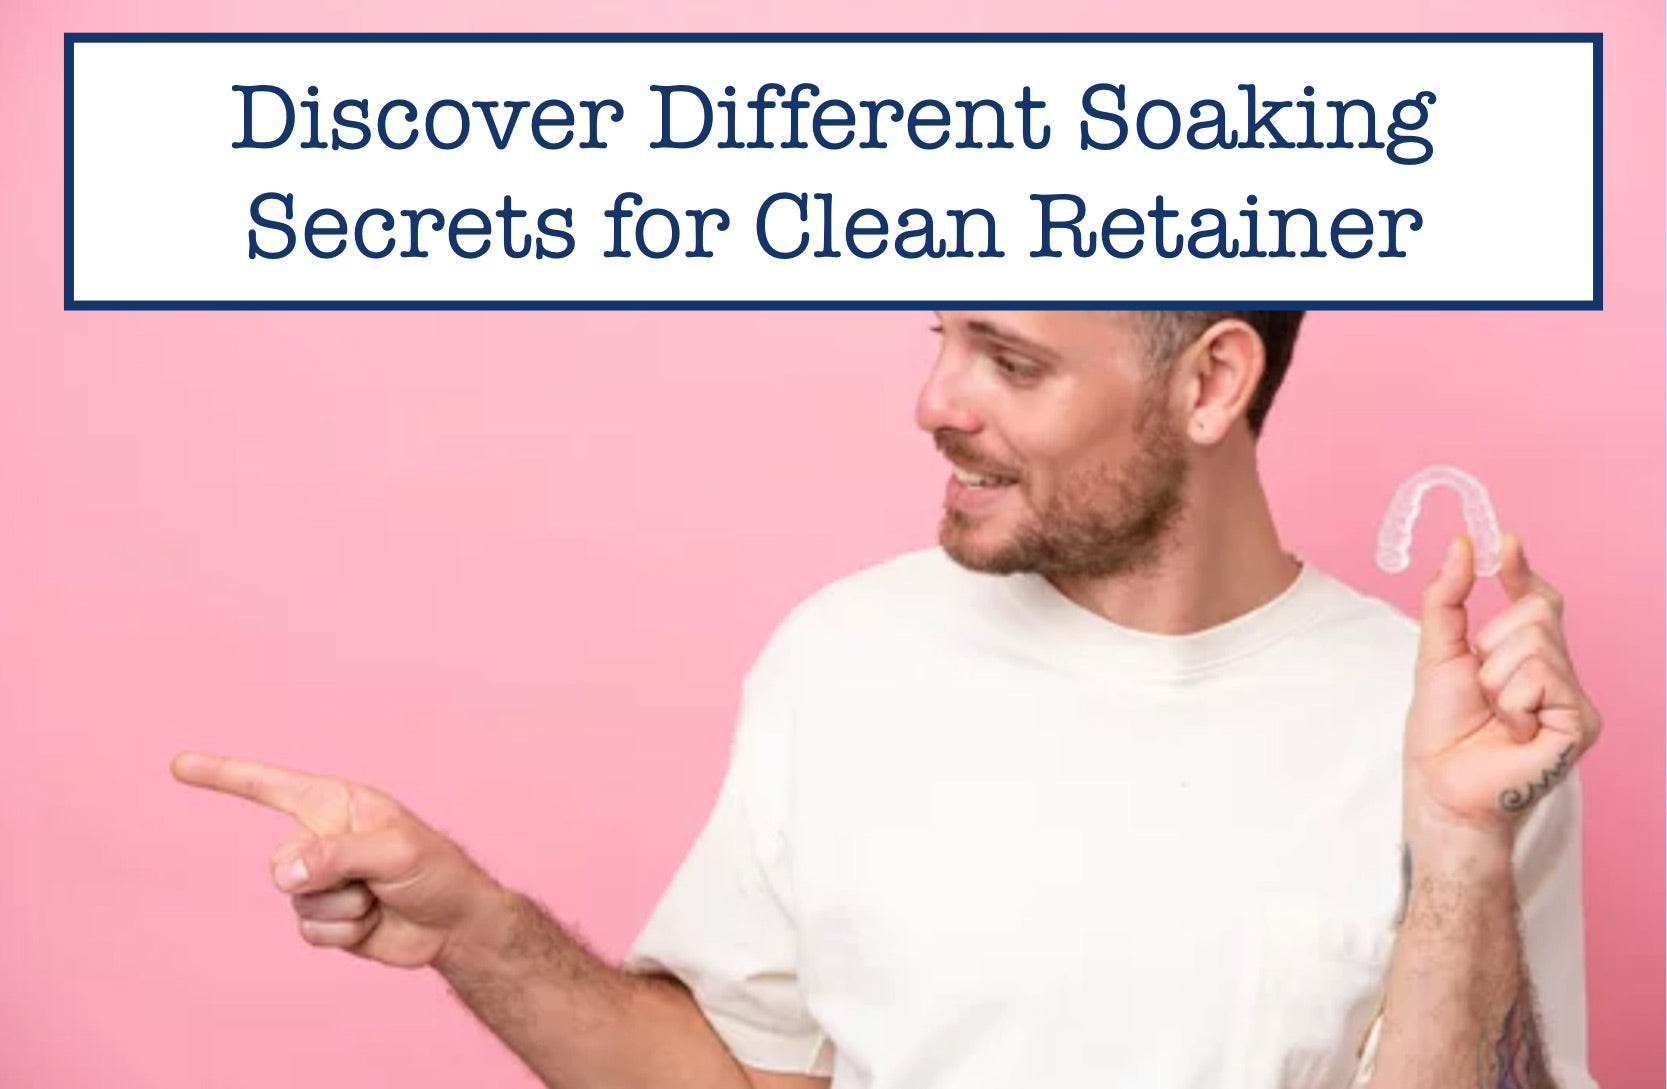 Discover Different Soaking Secrets for Clean Retainer